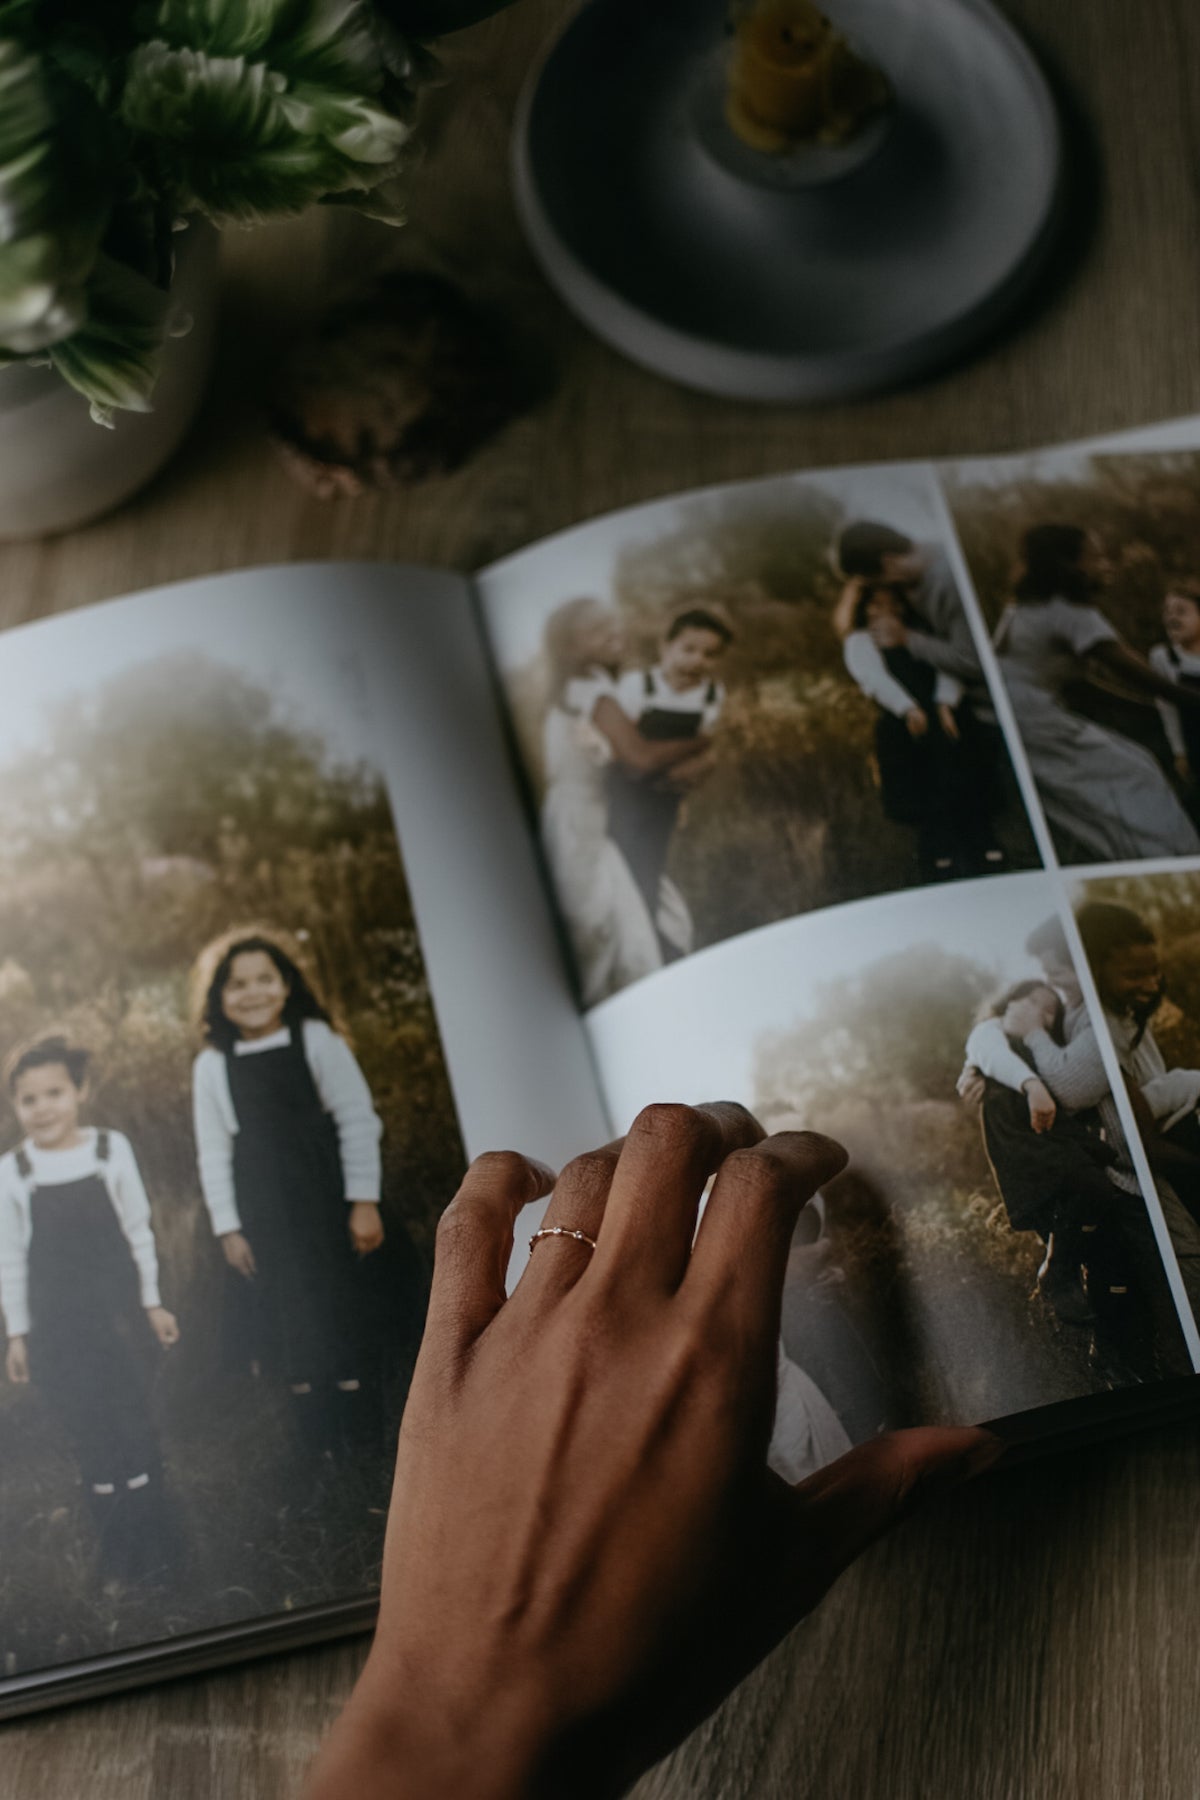 Mother's hand flipping through album filled with photos of her children